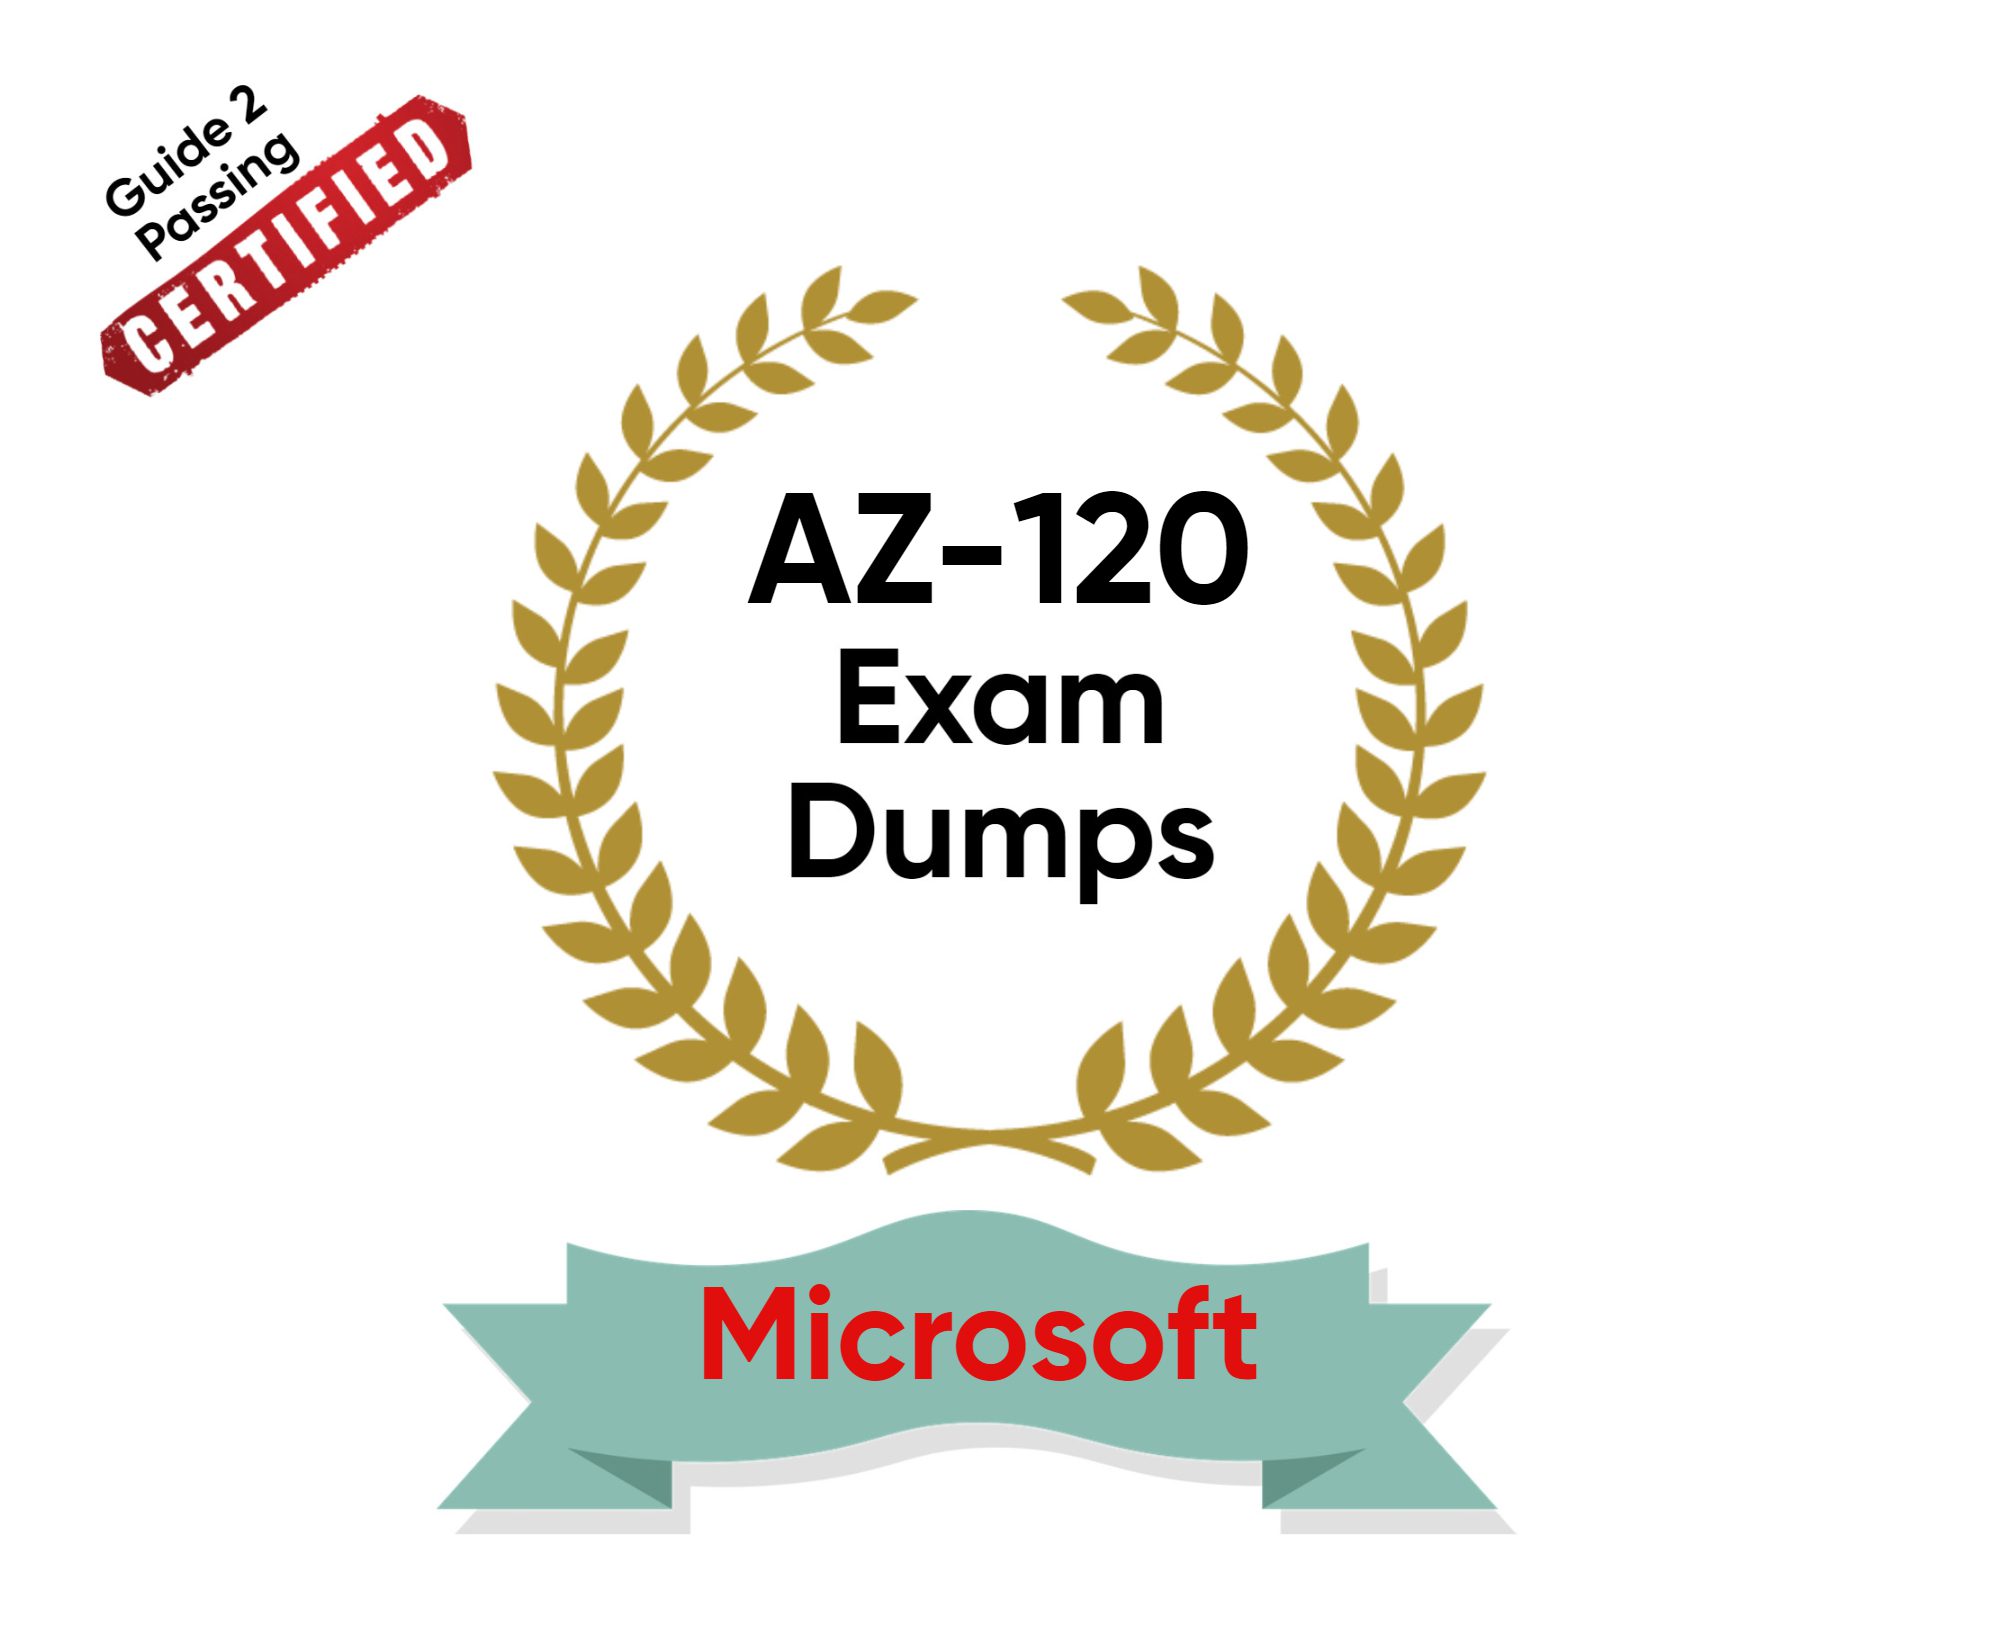 Pass Your Microsoft AZ-120 Exam Dumps From Guide 2 Passing